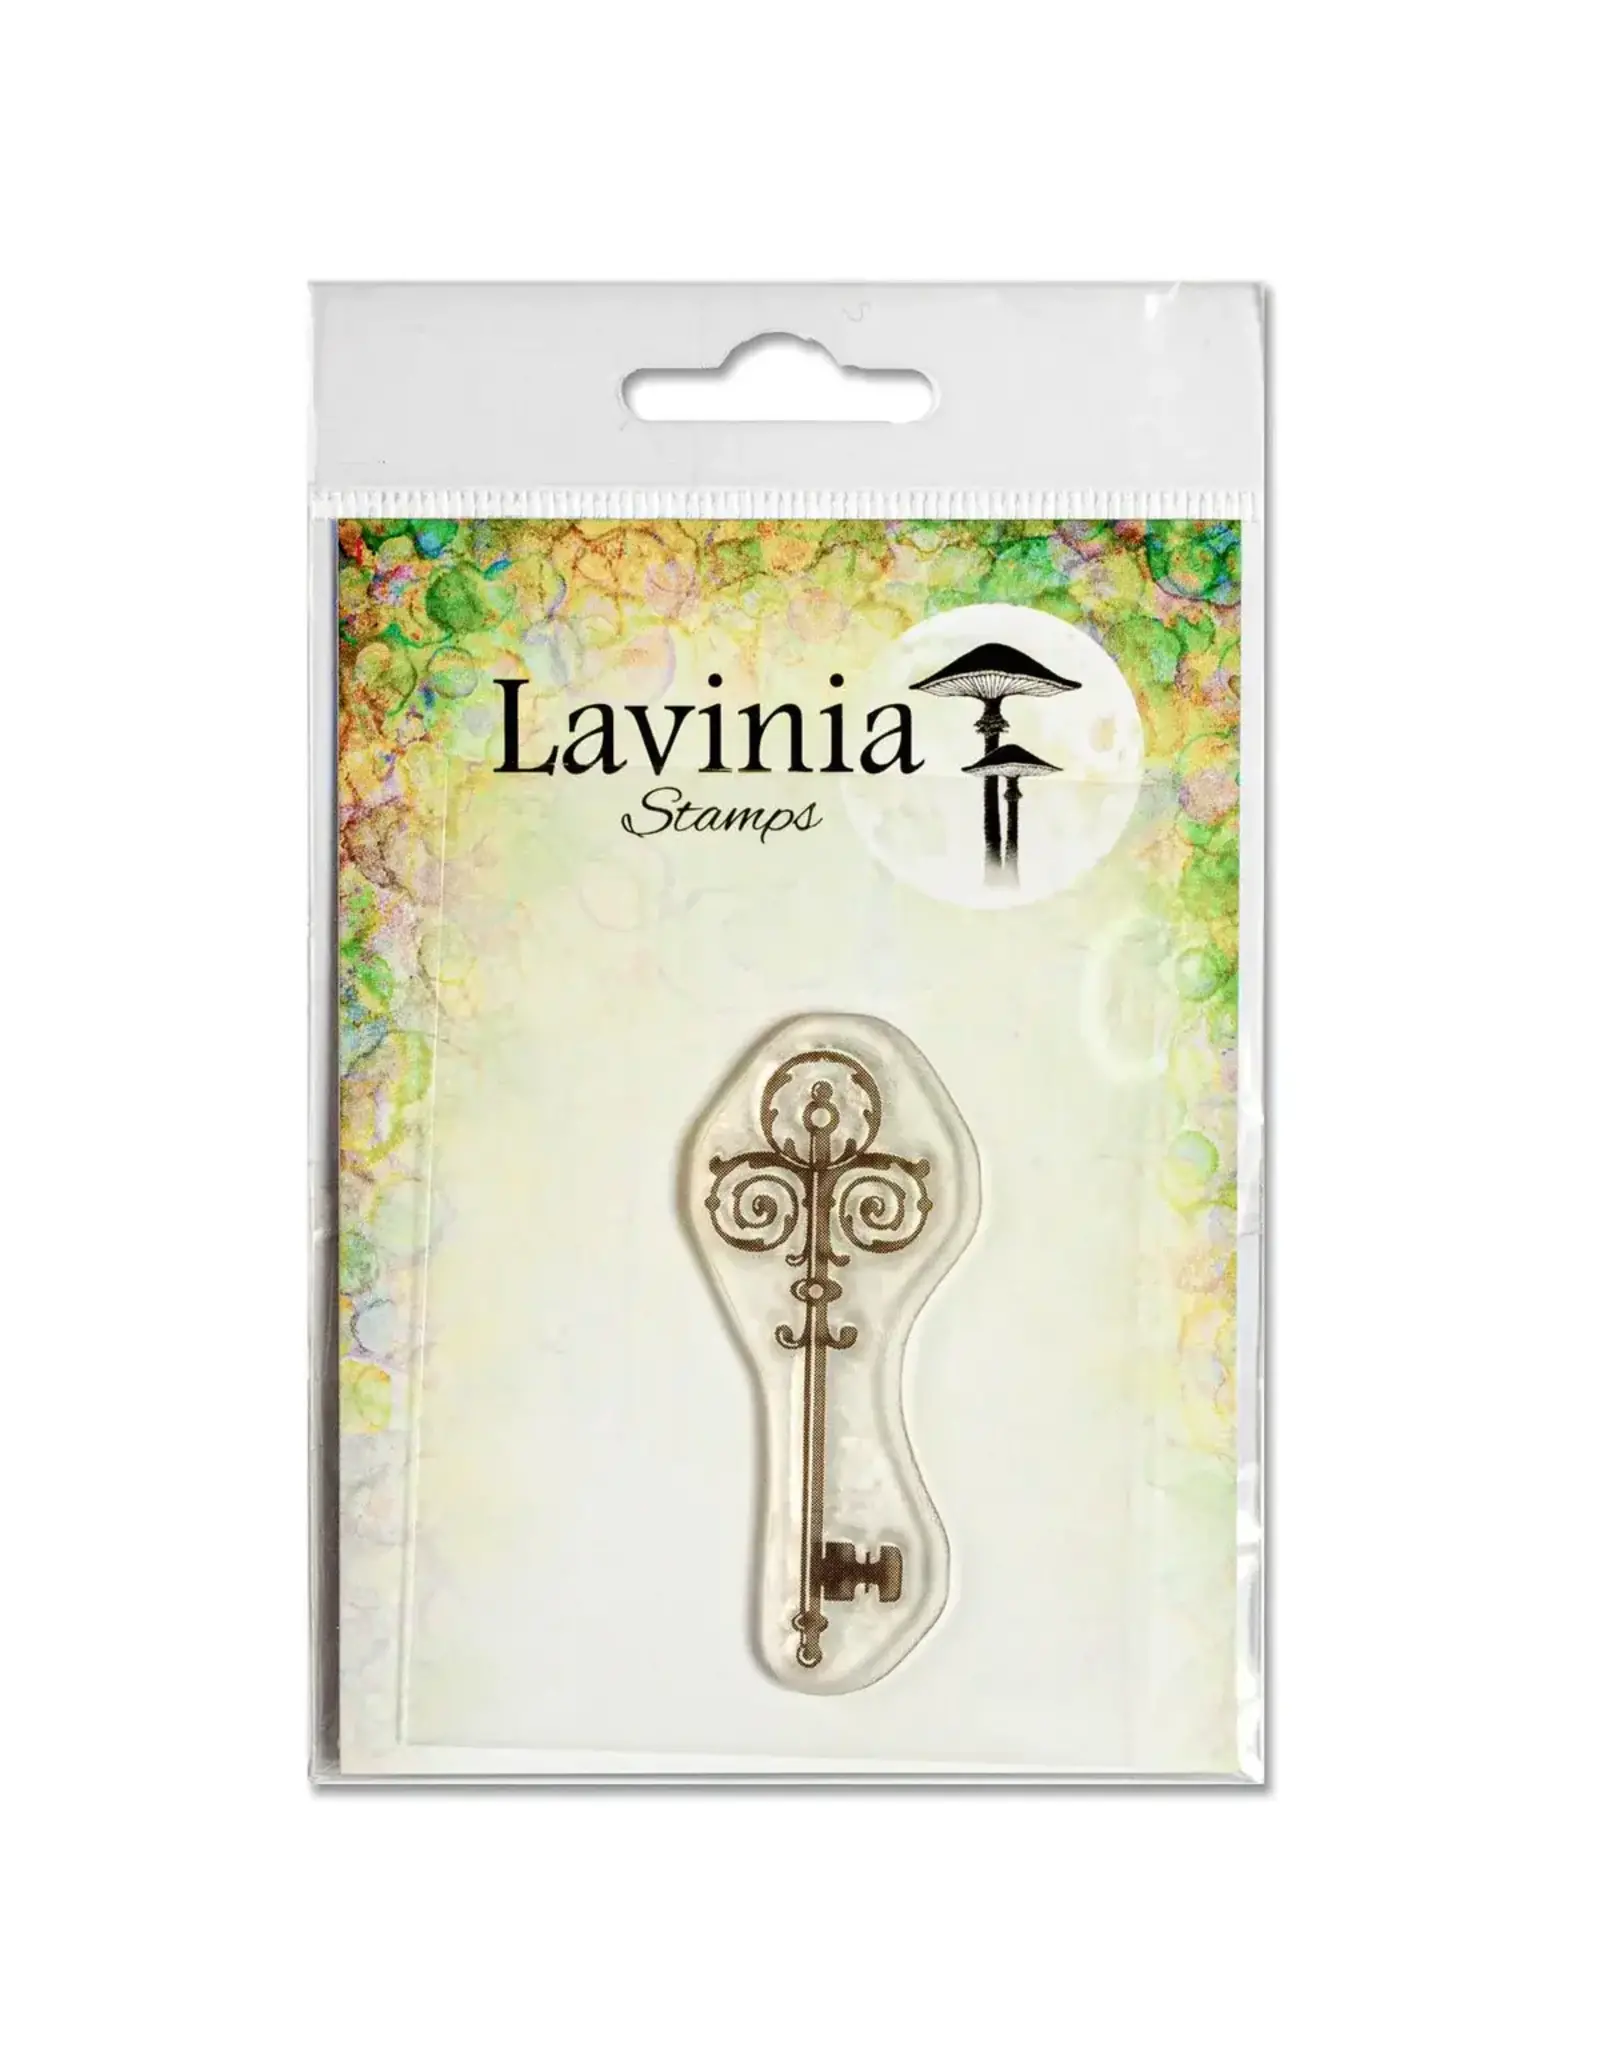 LAVINIA STAMPS LAVINIA STAMPS KEY SMALL CLEAR STAMP